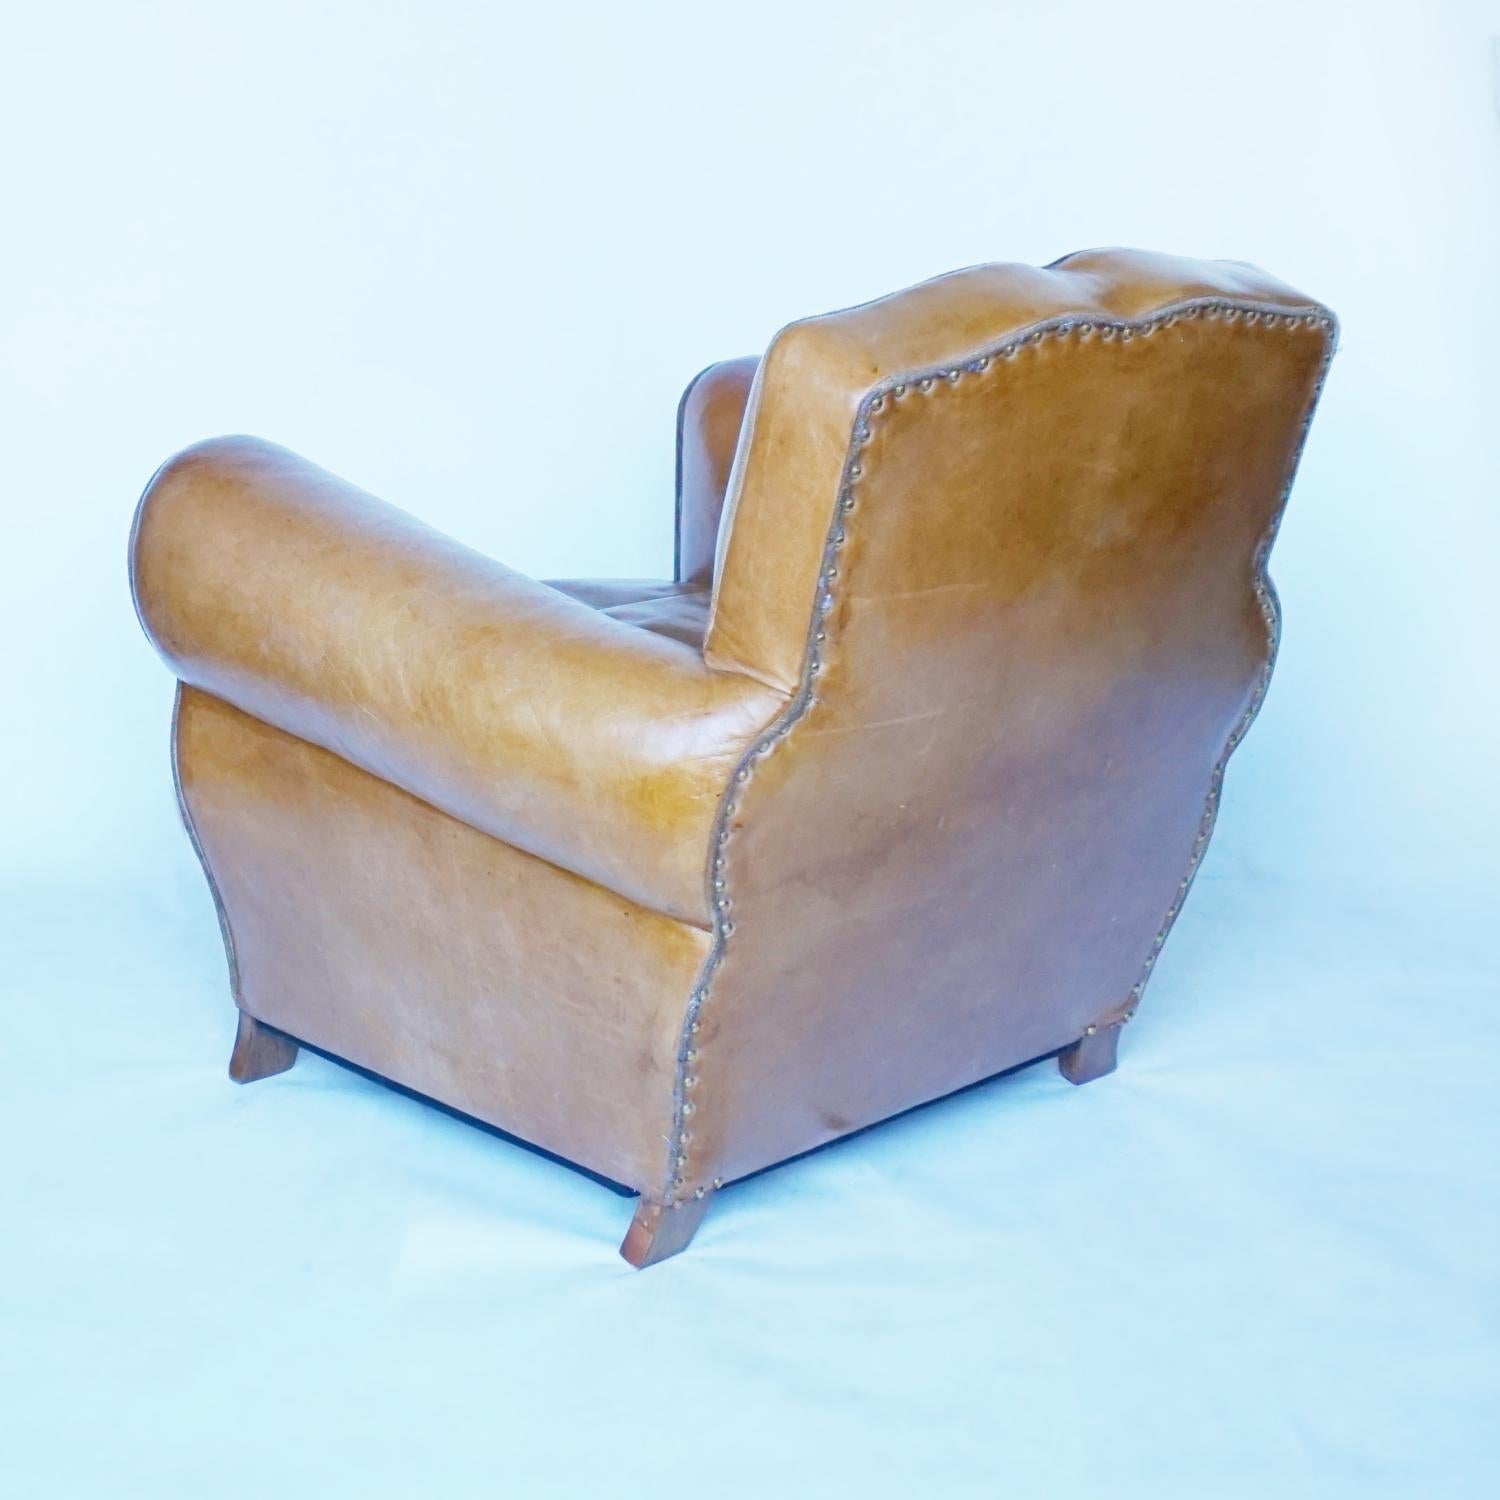 Pair of French Art Deco Club Chairs Upholstered in Brown Leather Circa 1940 4